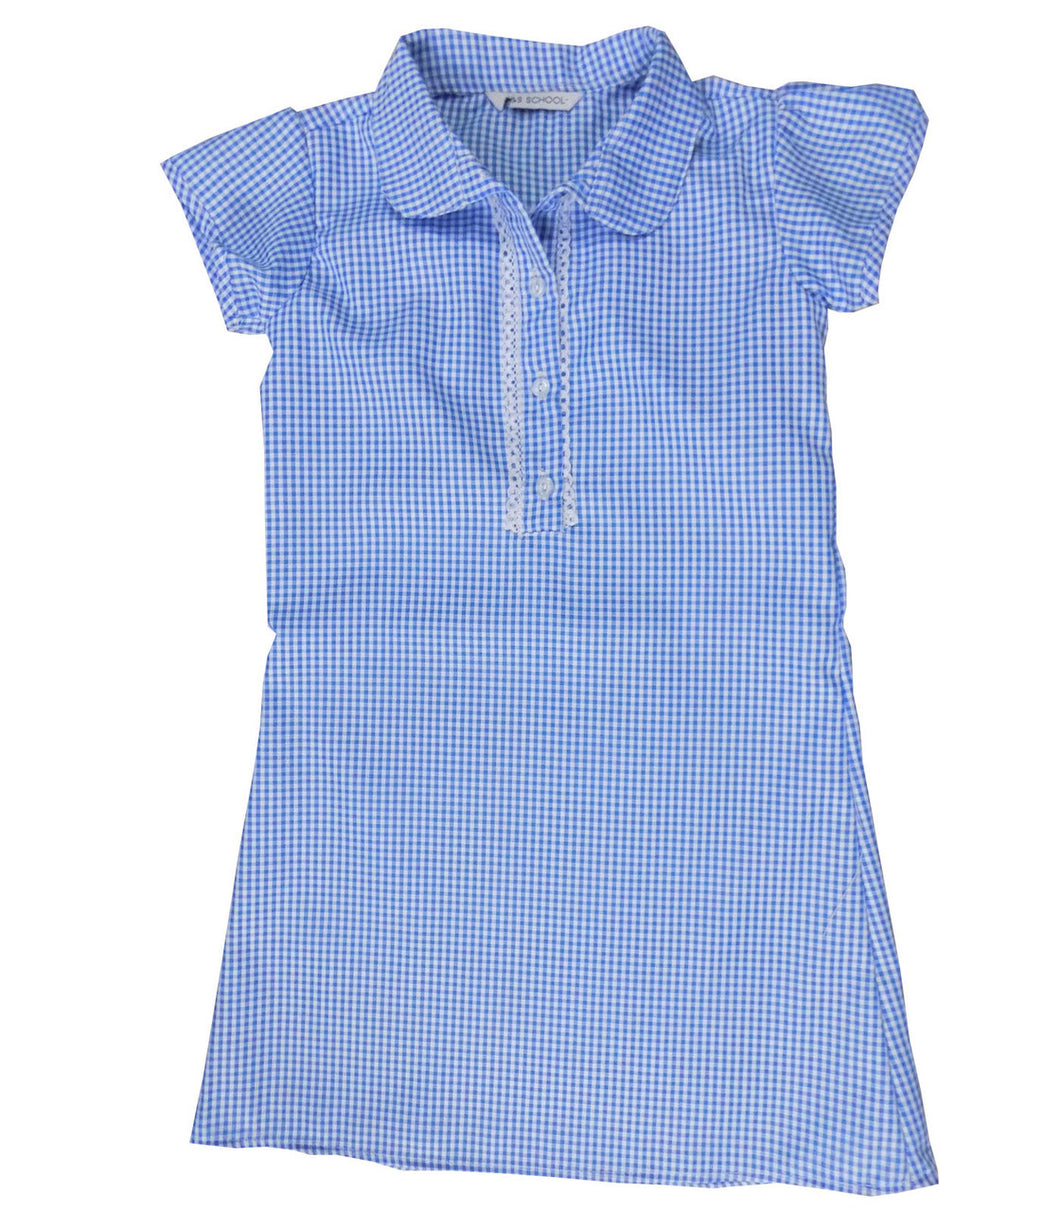 Girls Front Lace Buttoned Panel Collared Gingham School Dress